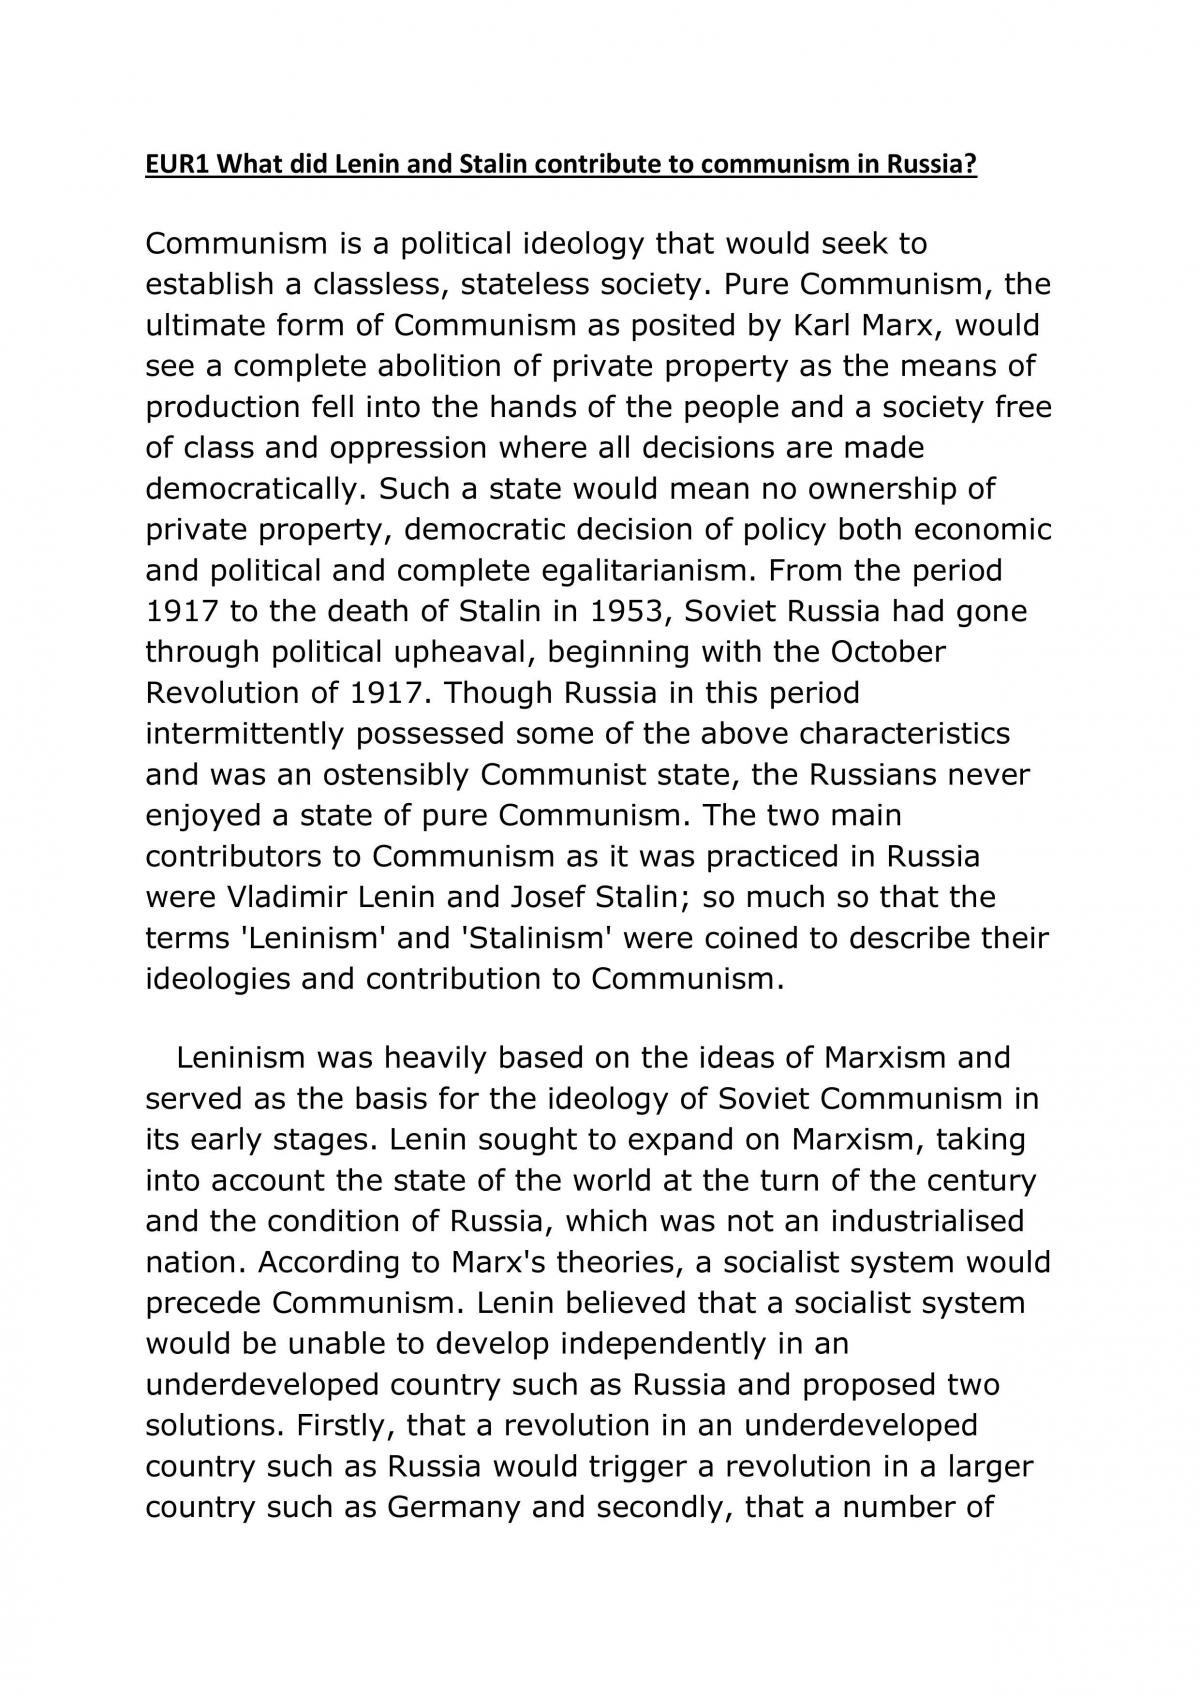 history essay about communism in russia